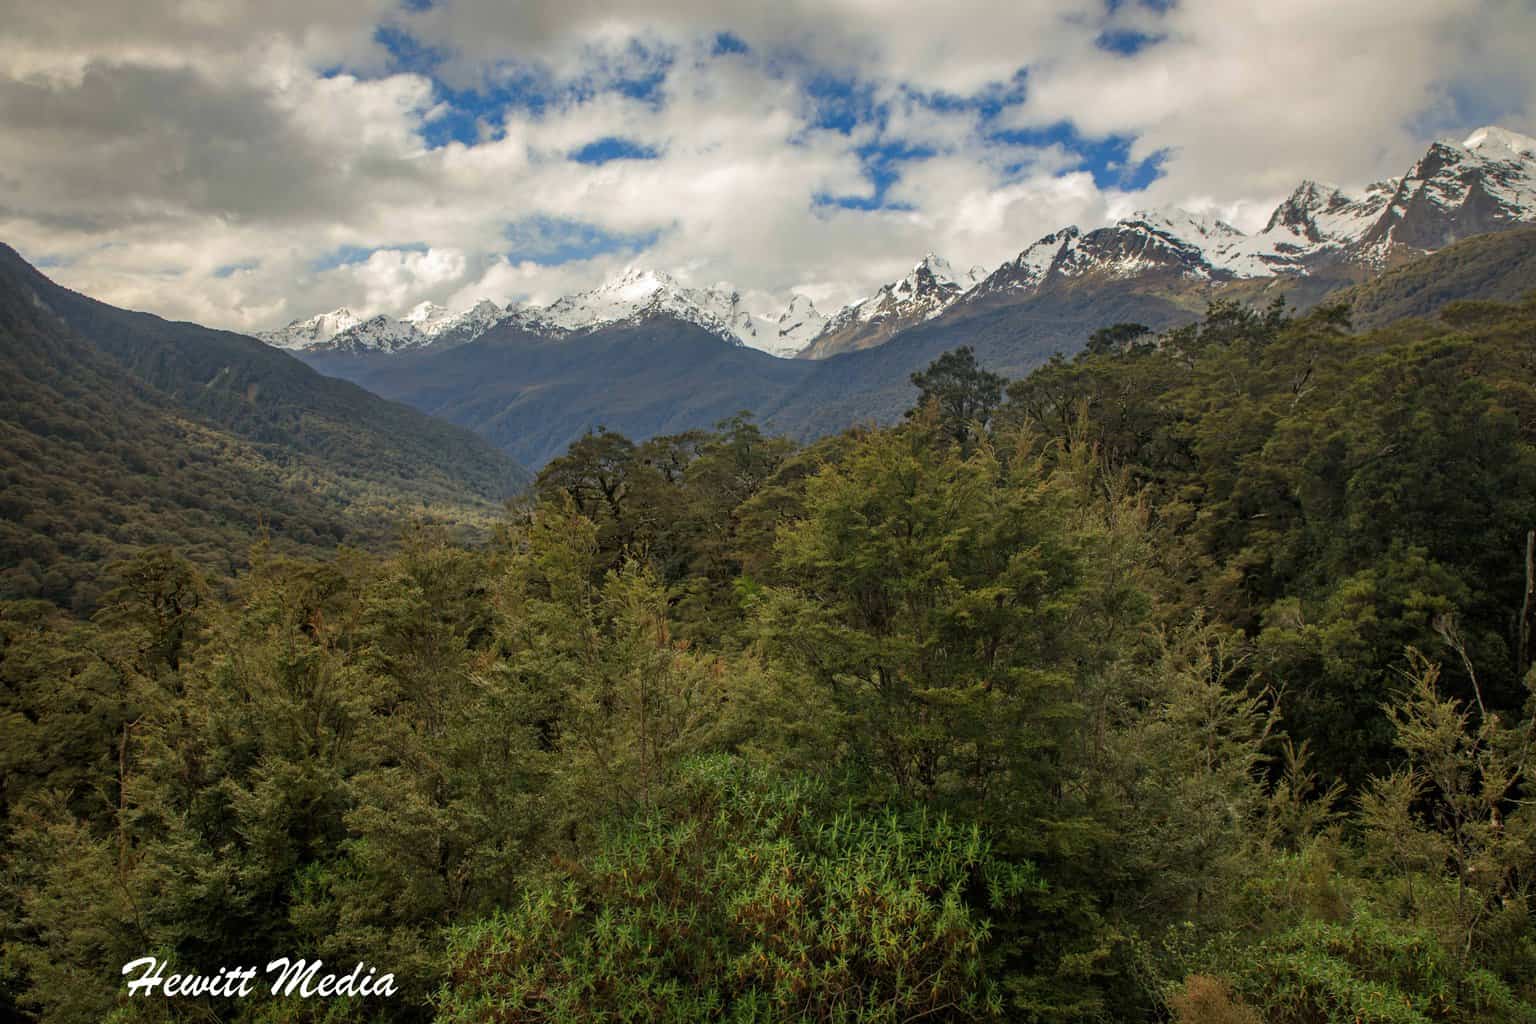 The Ultimate Milford Track Hiking Guide